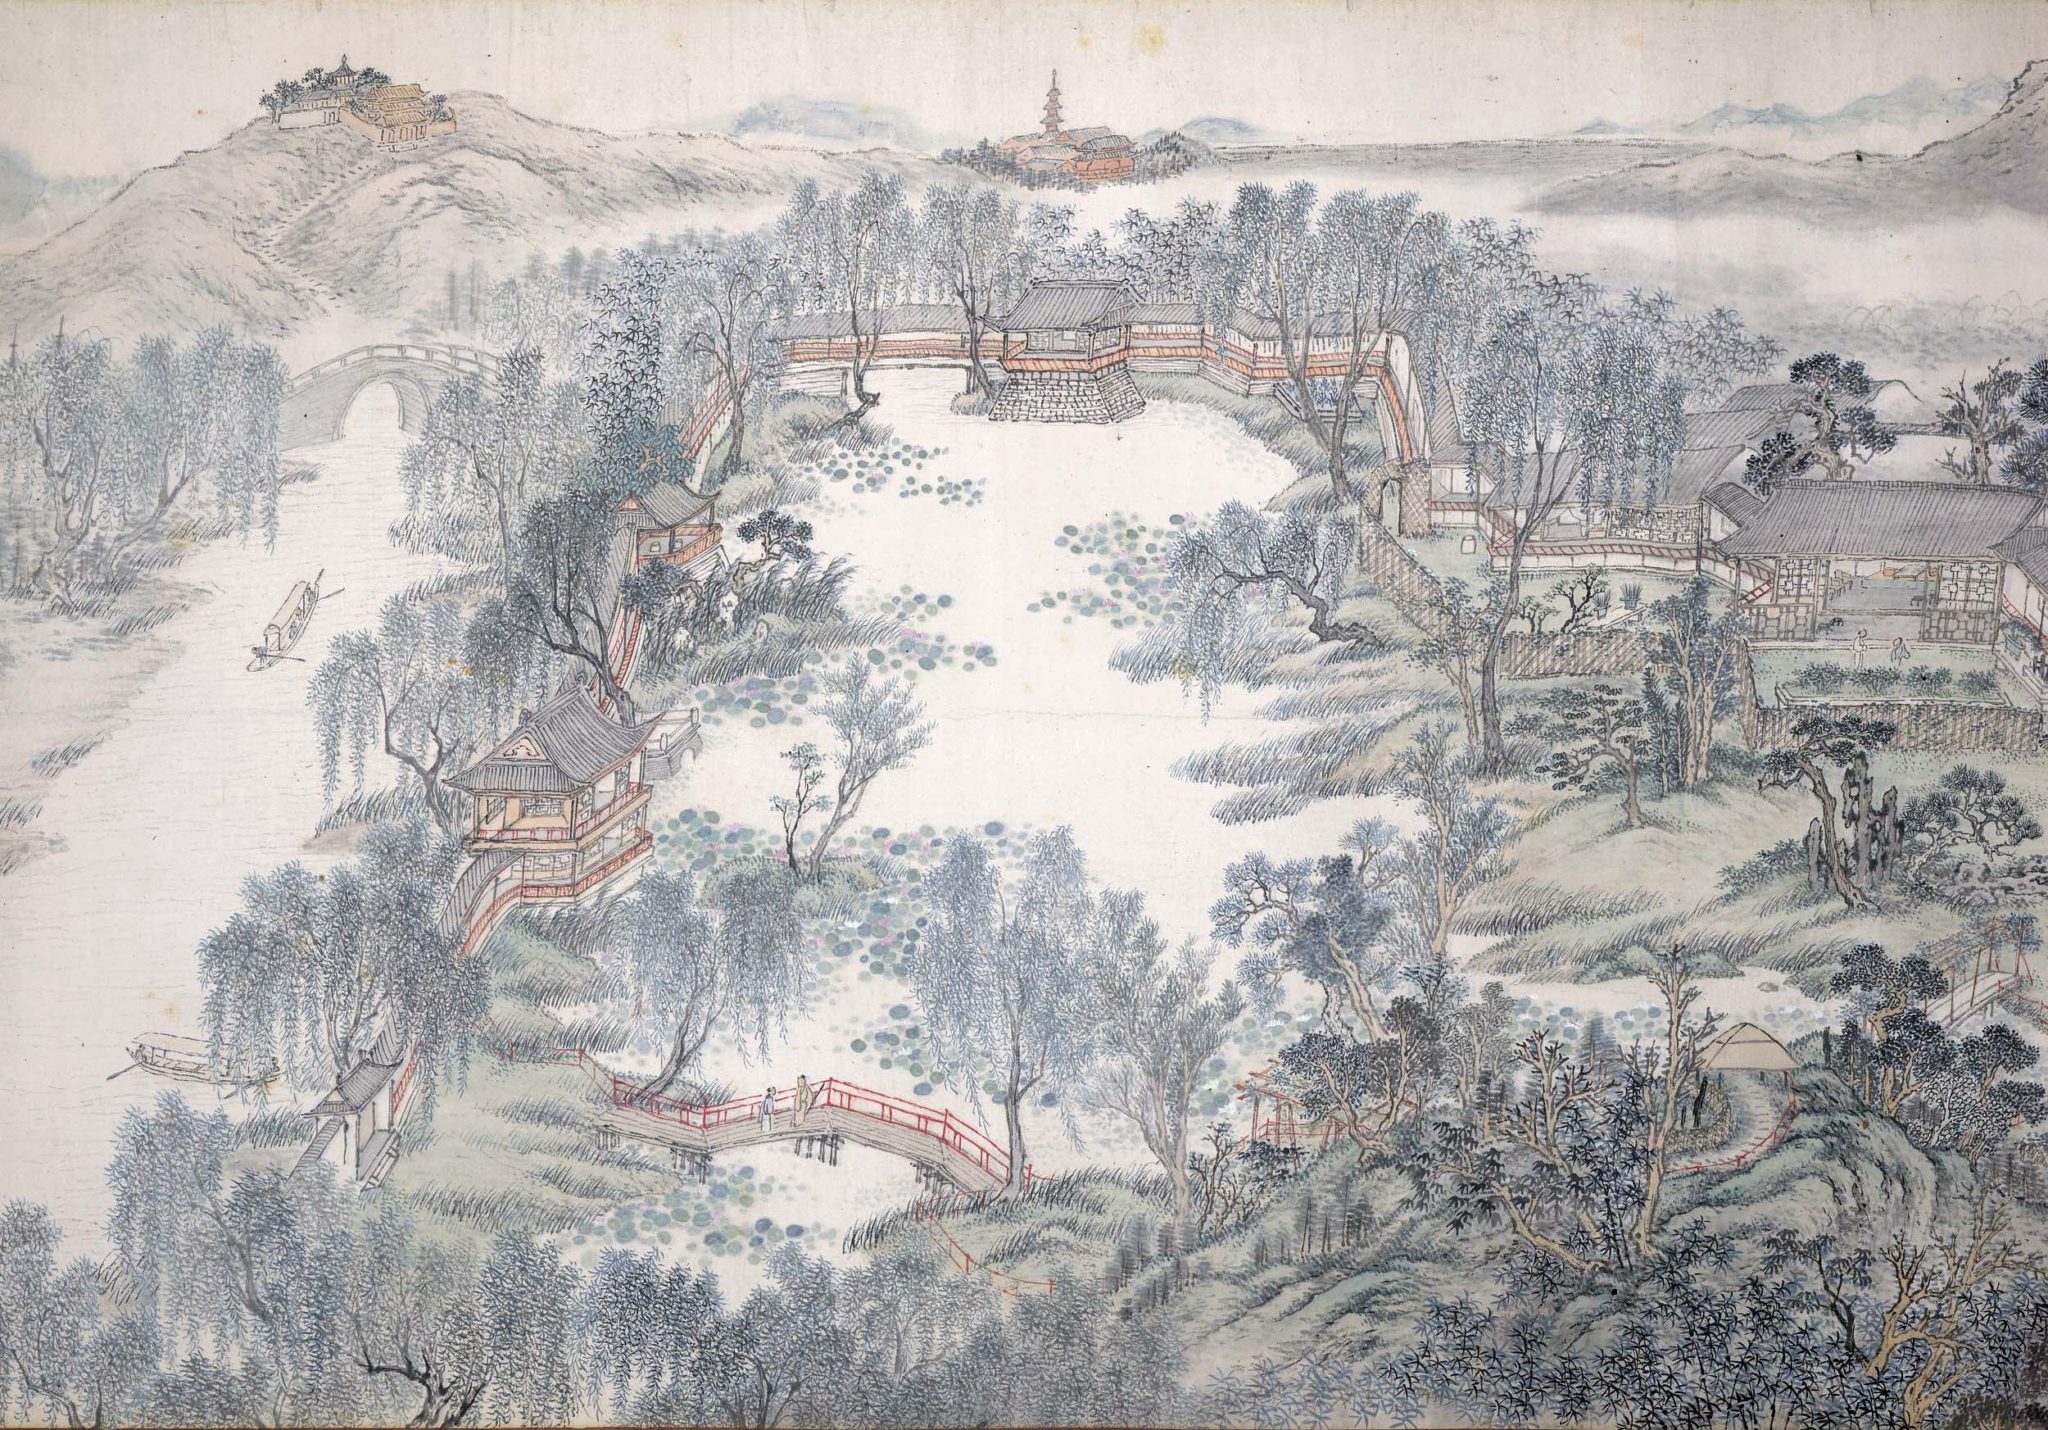 » Chinese scholar-painters, an introduction